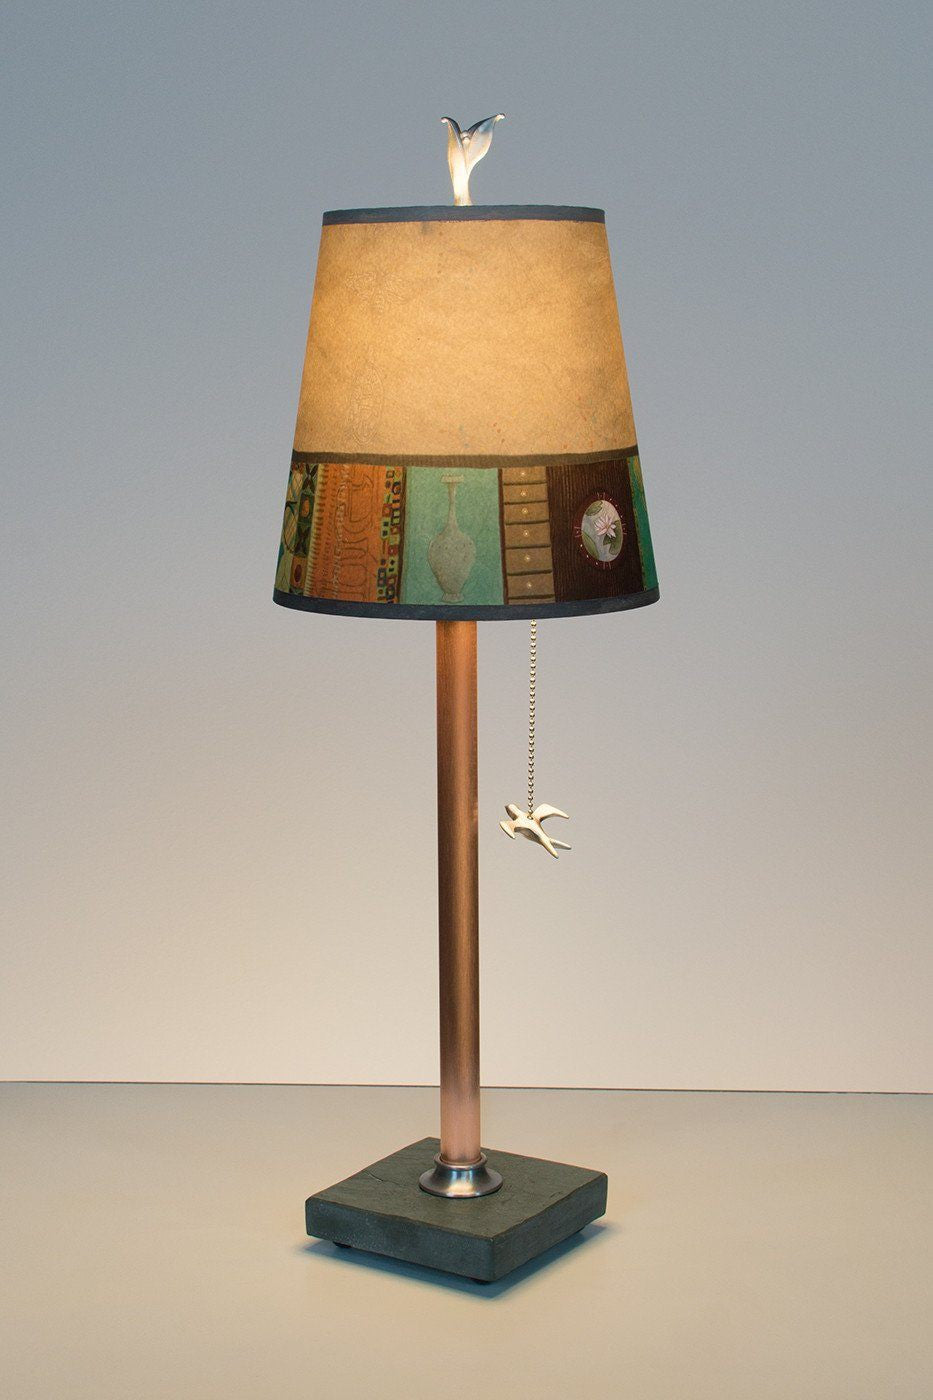 Janna Ugone & Co Table Lamps Copper Table Lamp with Small Drum Shade in Linen Match